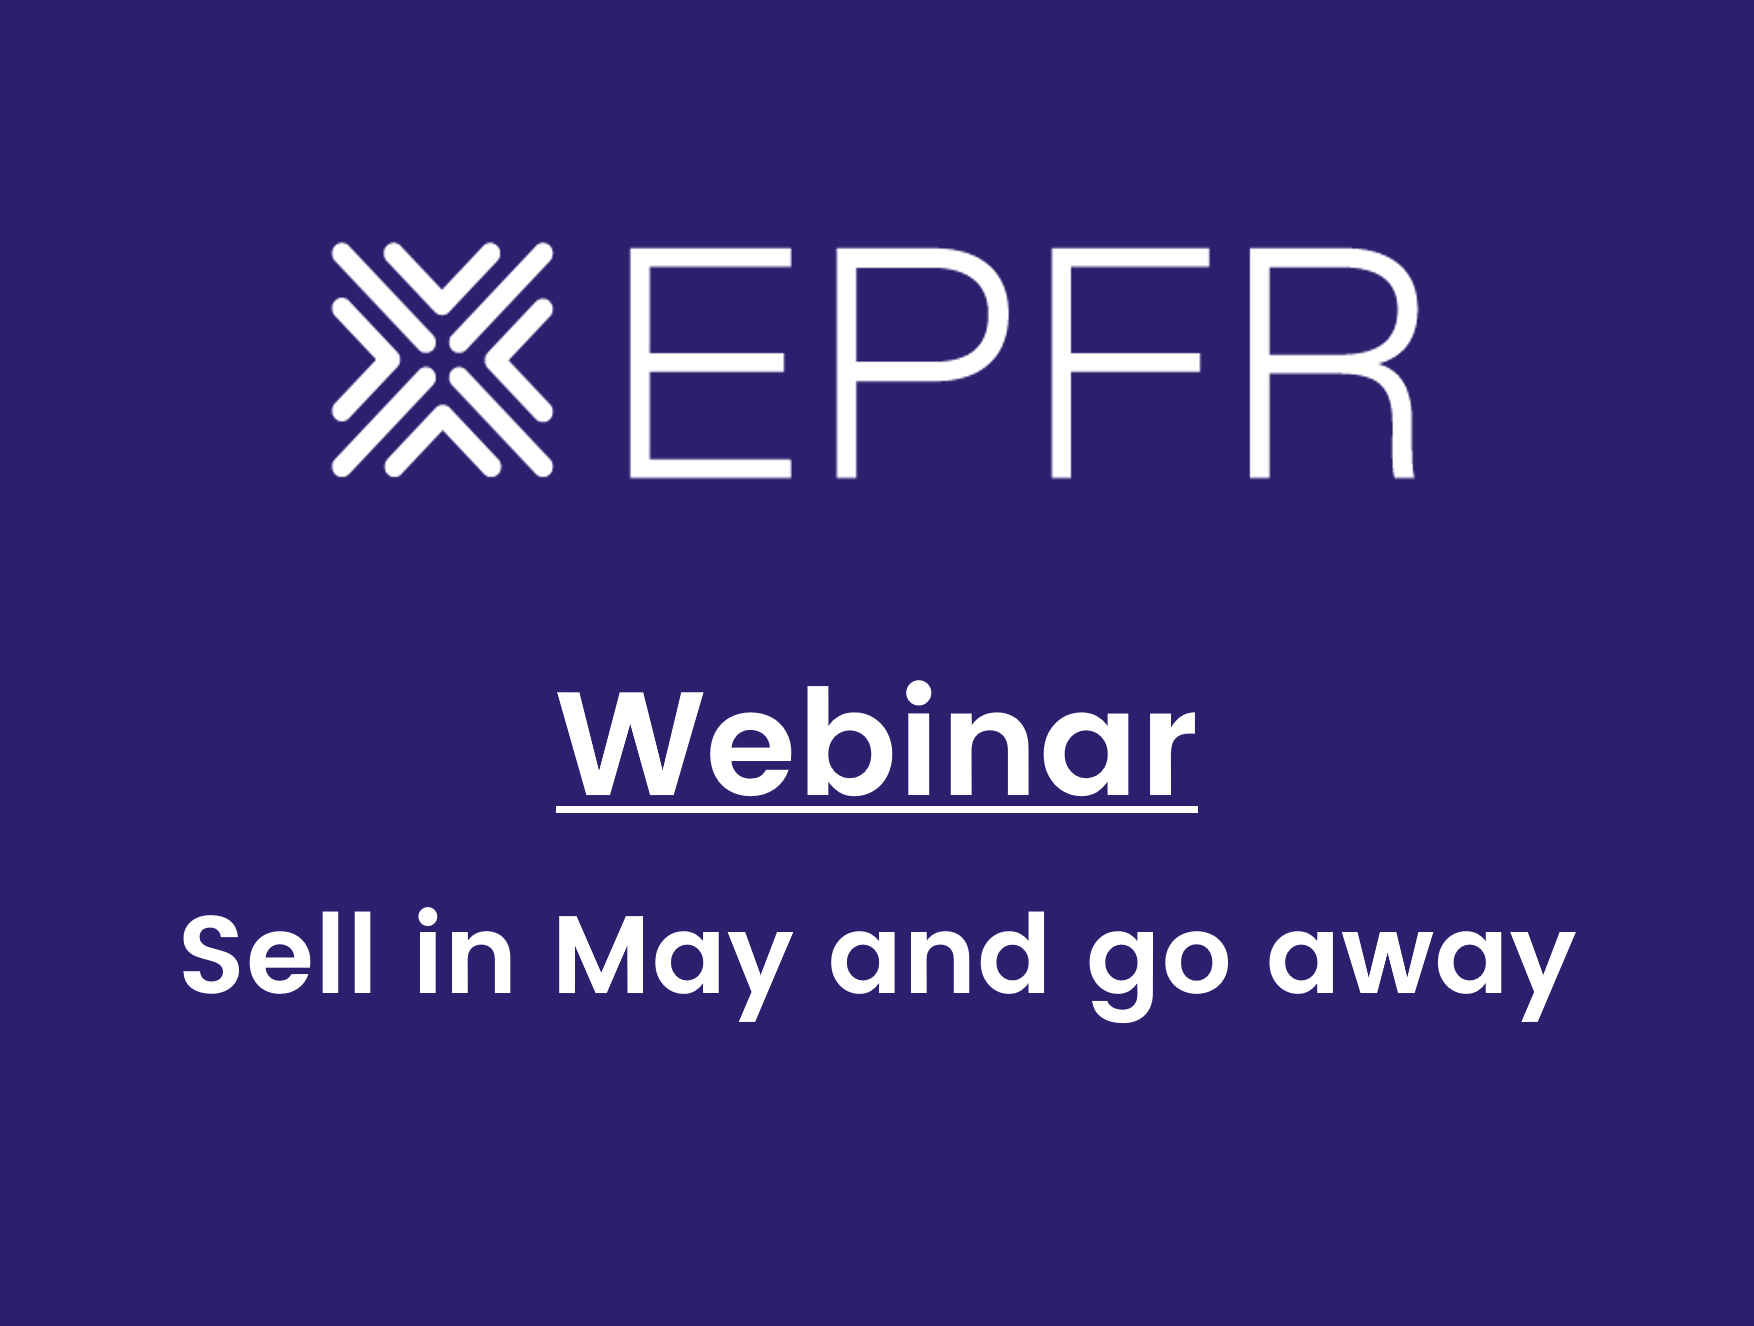 Webinar: Sell in May and go away